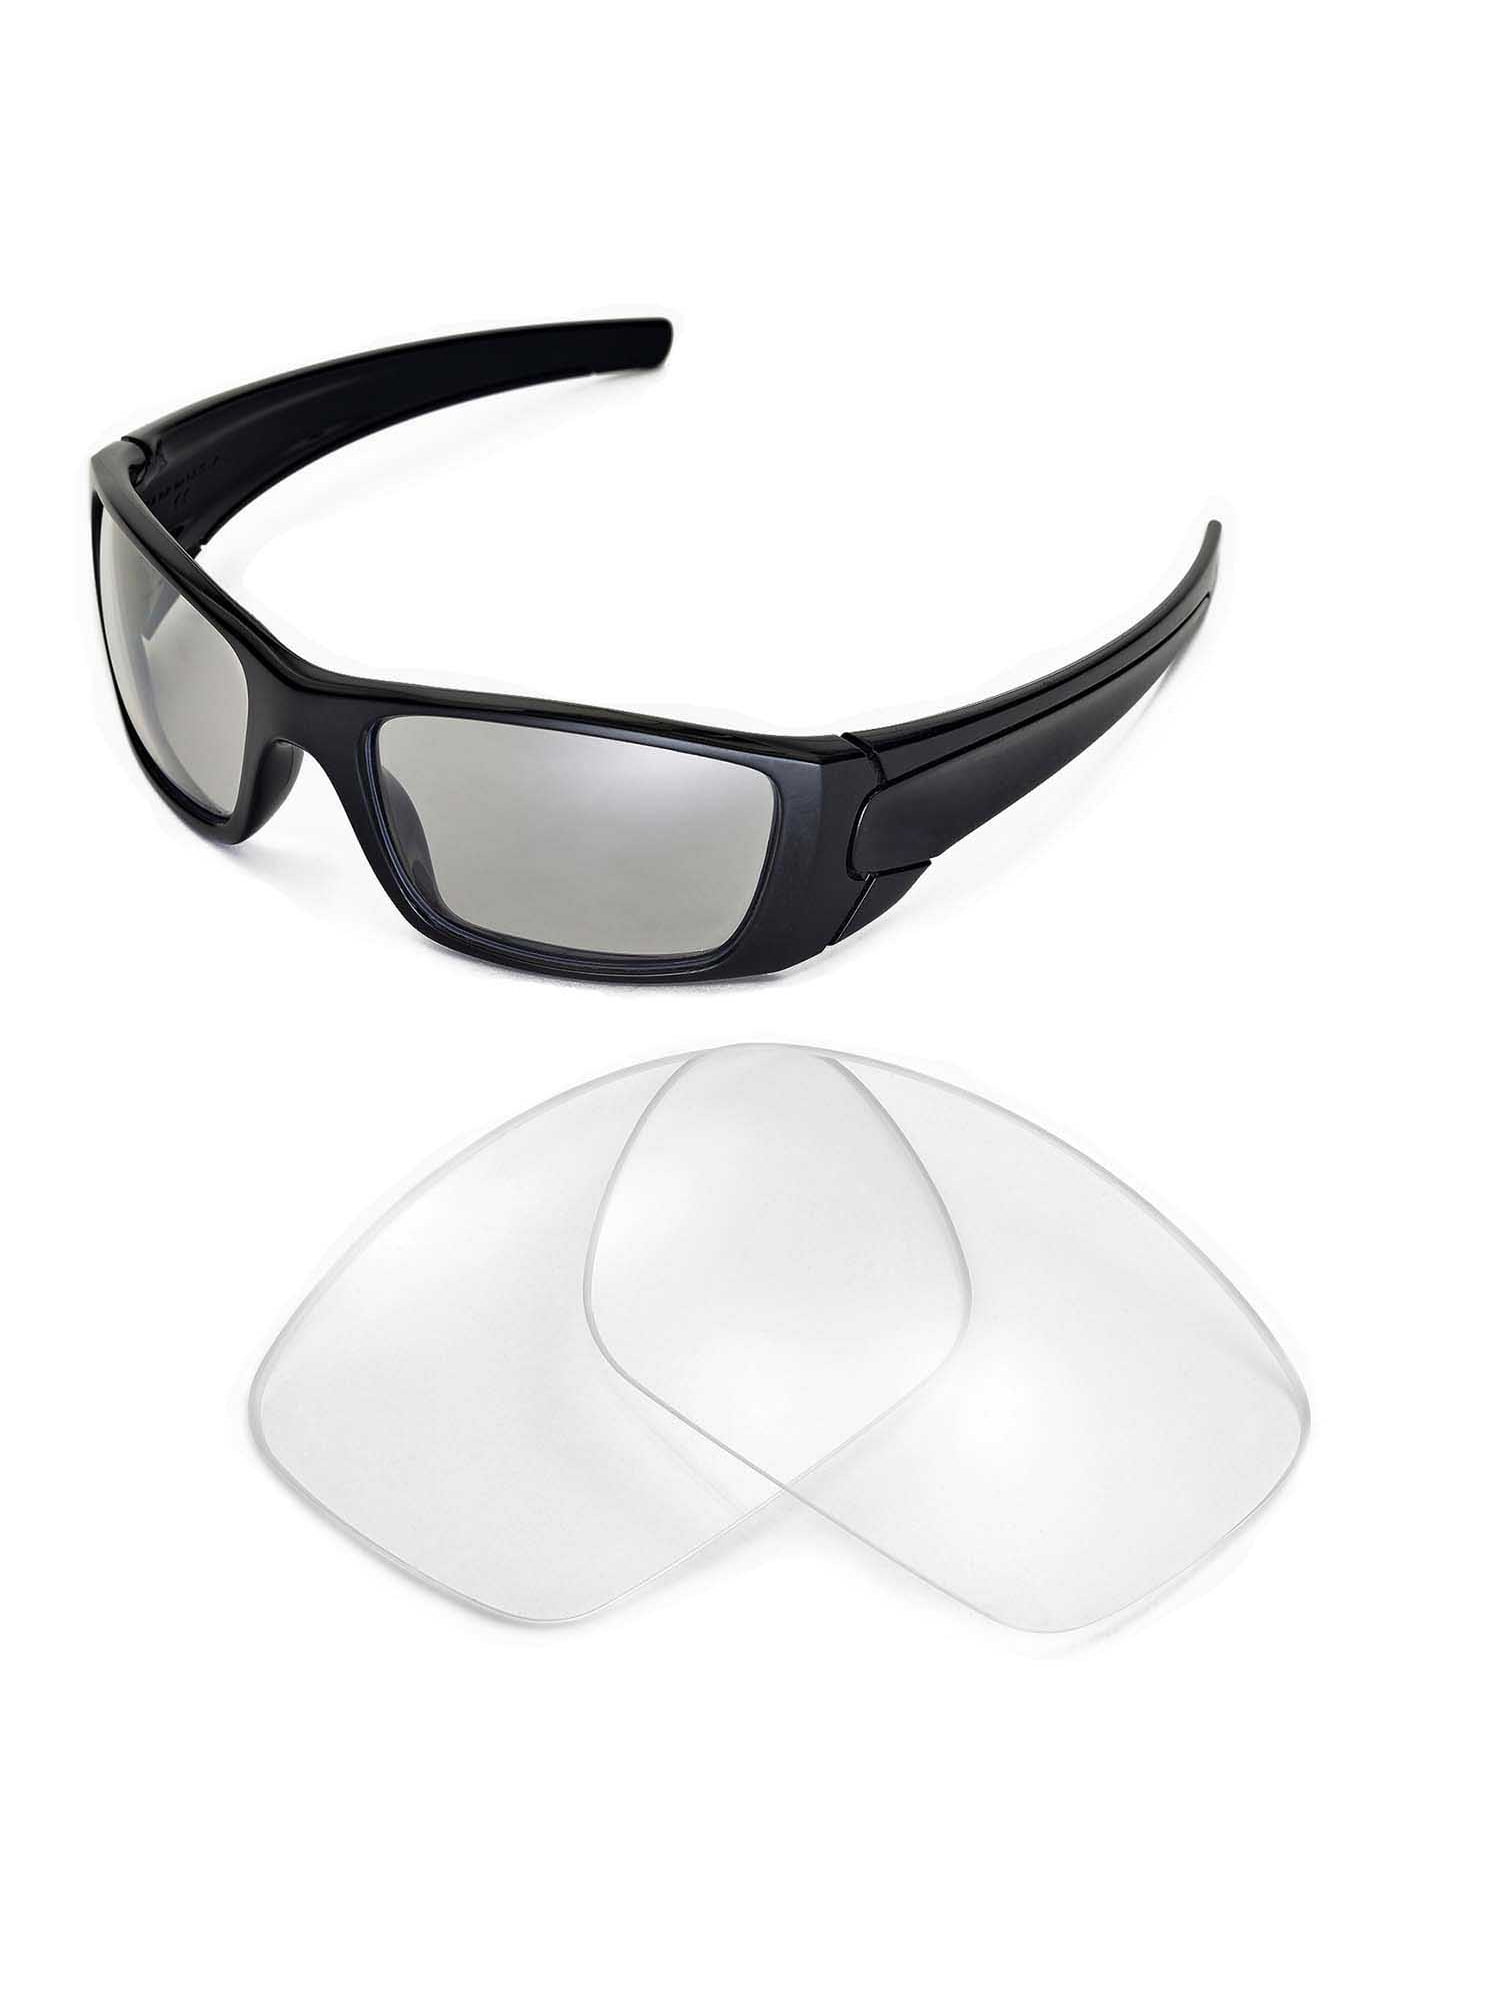 replacement lenses for oakley fuel cell sunglasses